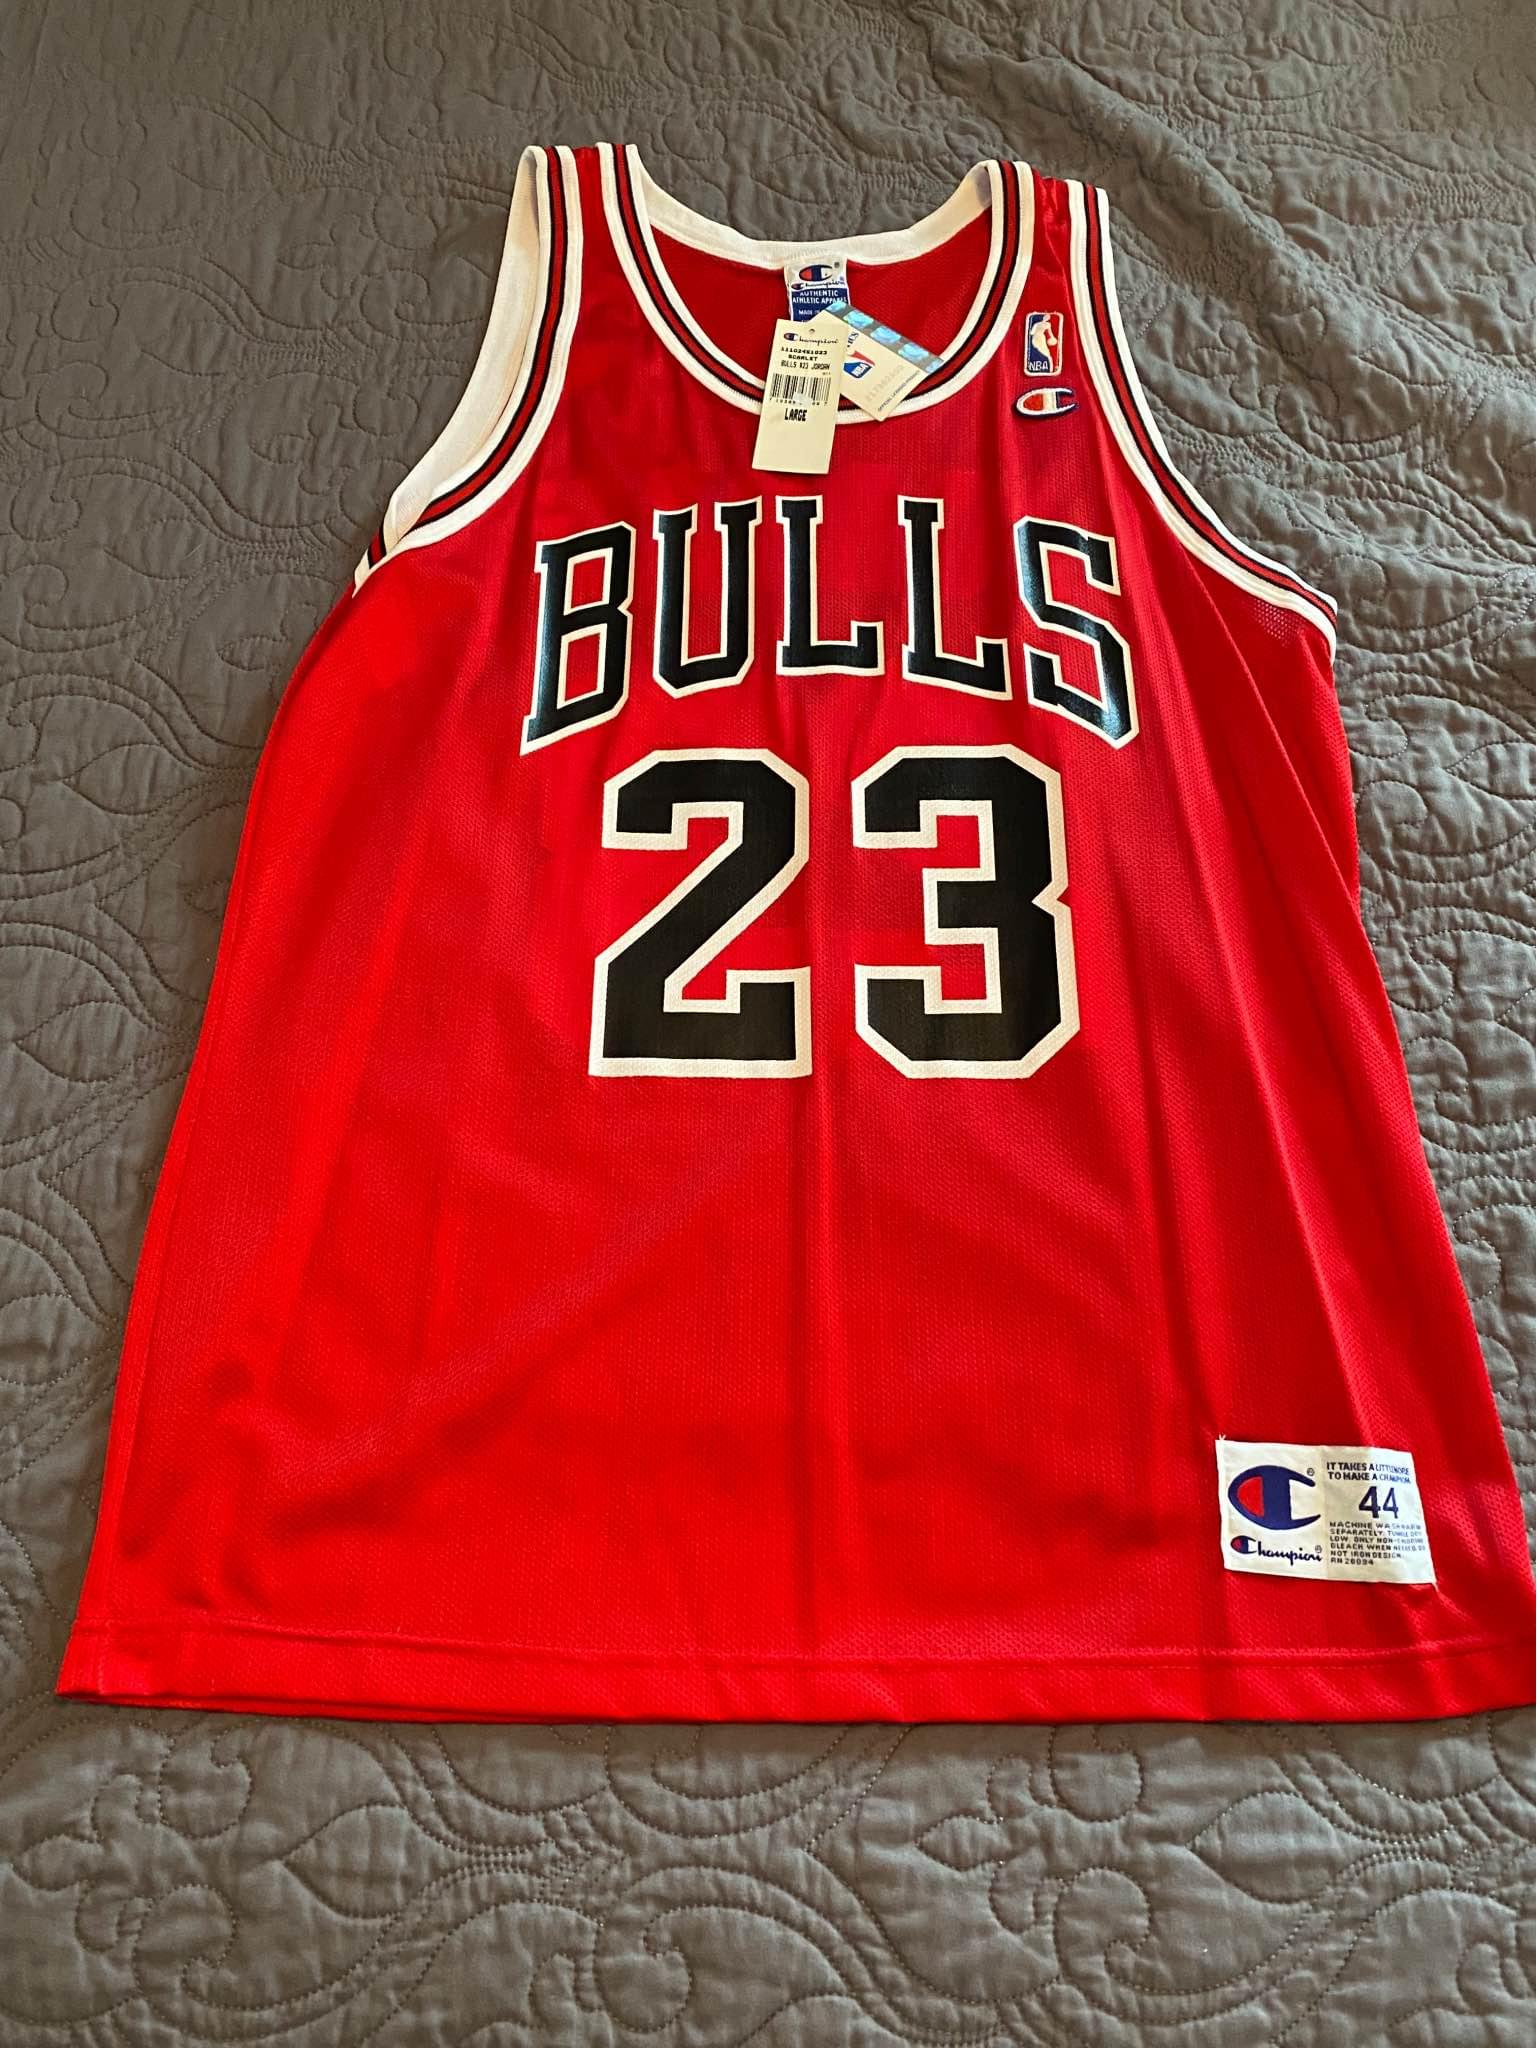 chicago bulls jersey youth xl